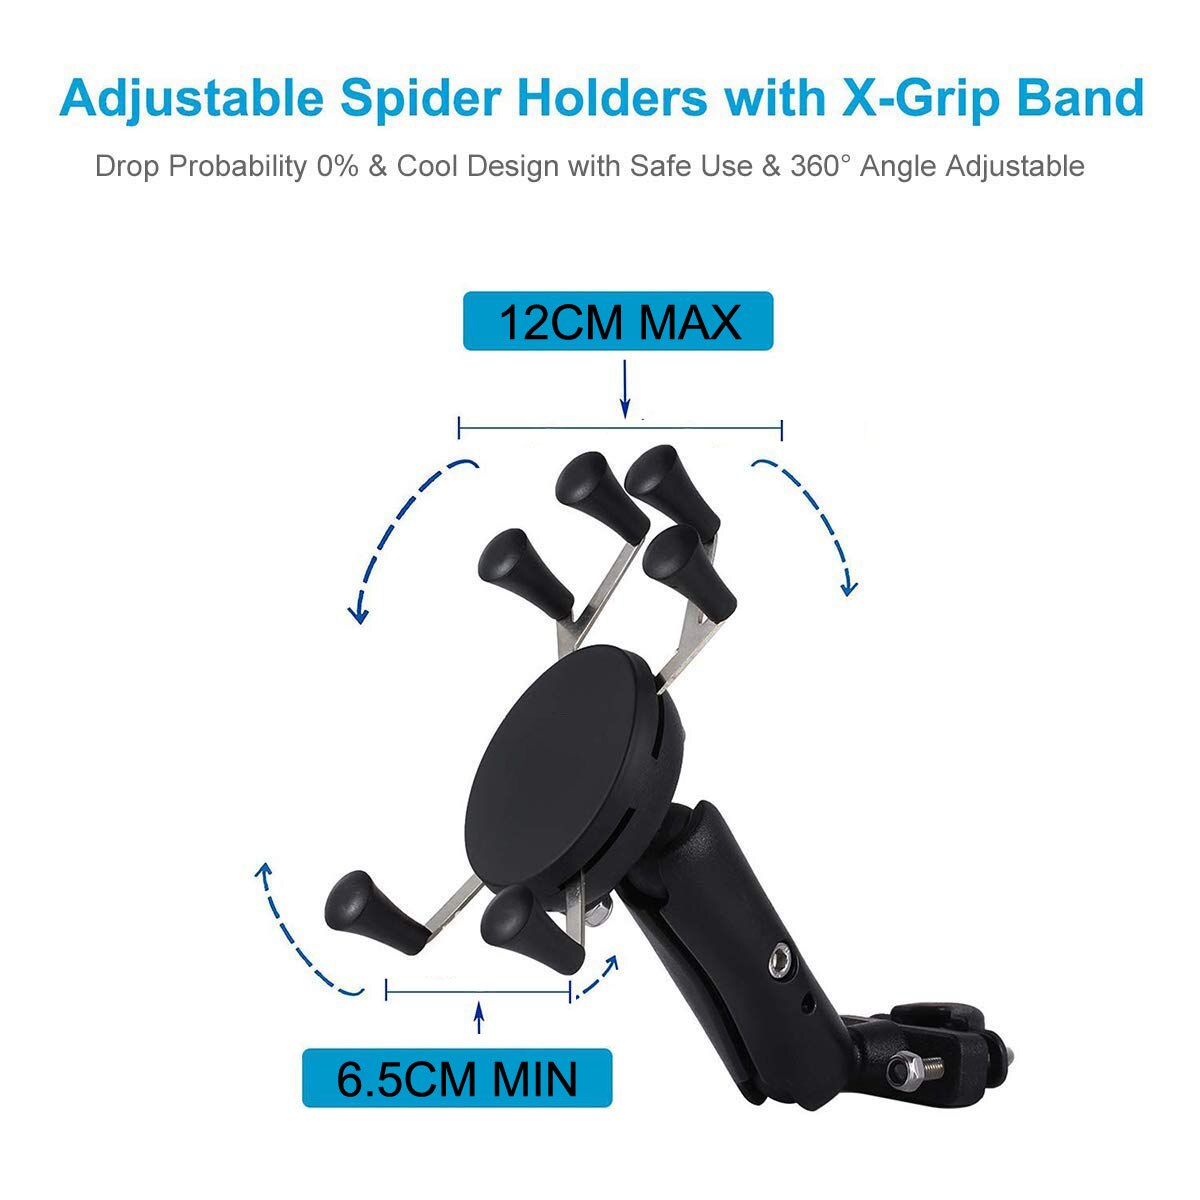 Adjustable Lazy Cell Phone Holder Motorcycle Rear View Mirror Handlebar Mount Stand Support For Smart Mobile Phone Moto Holder